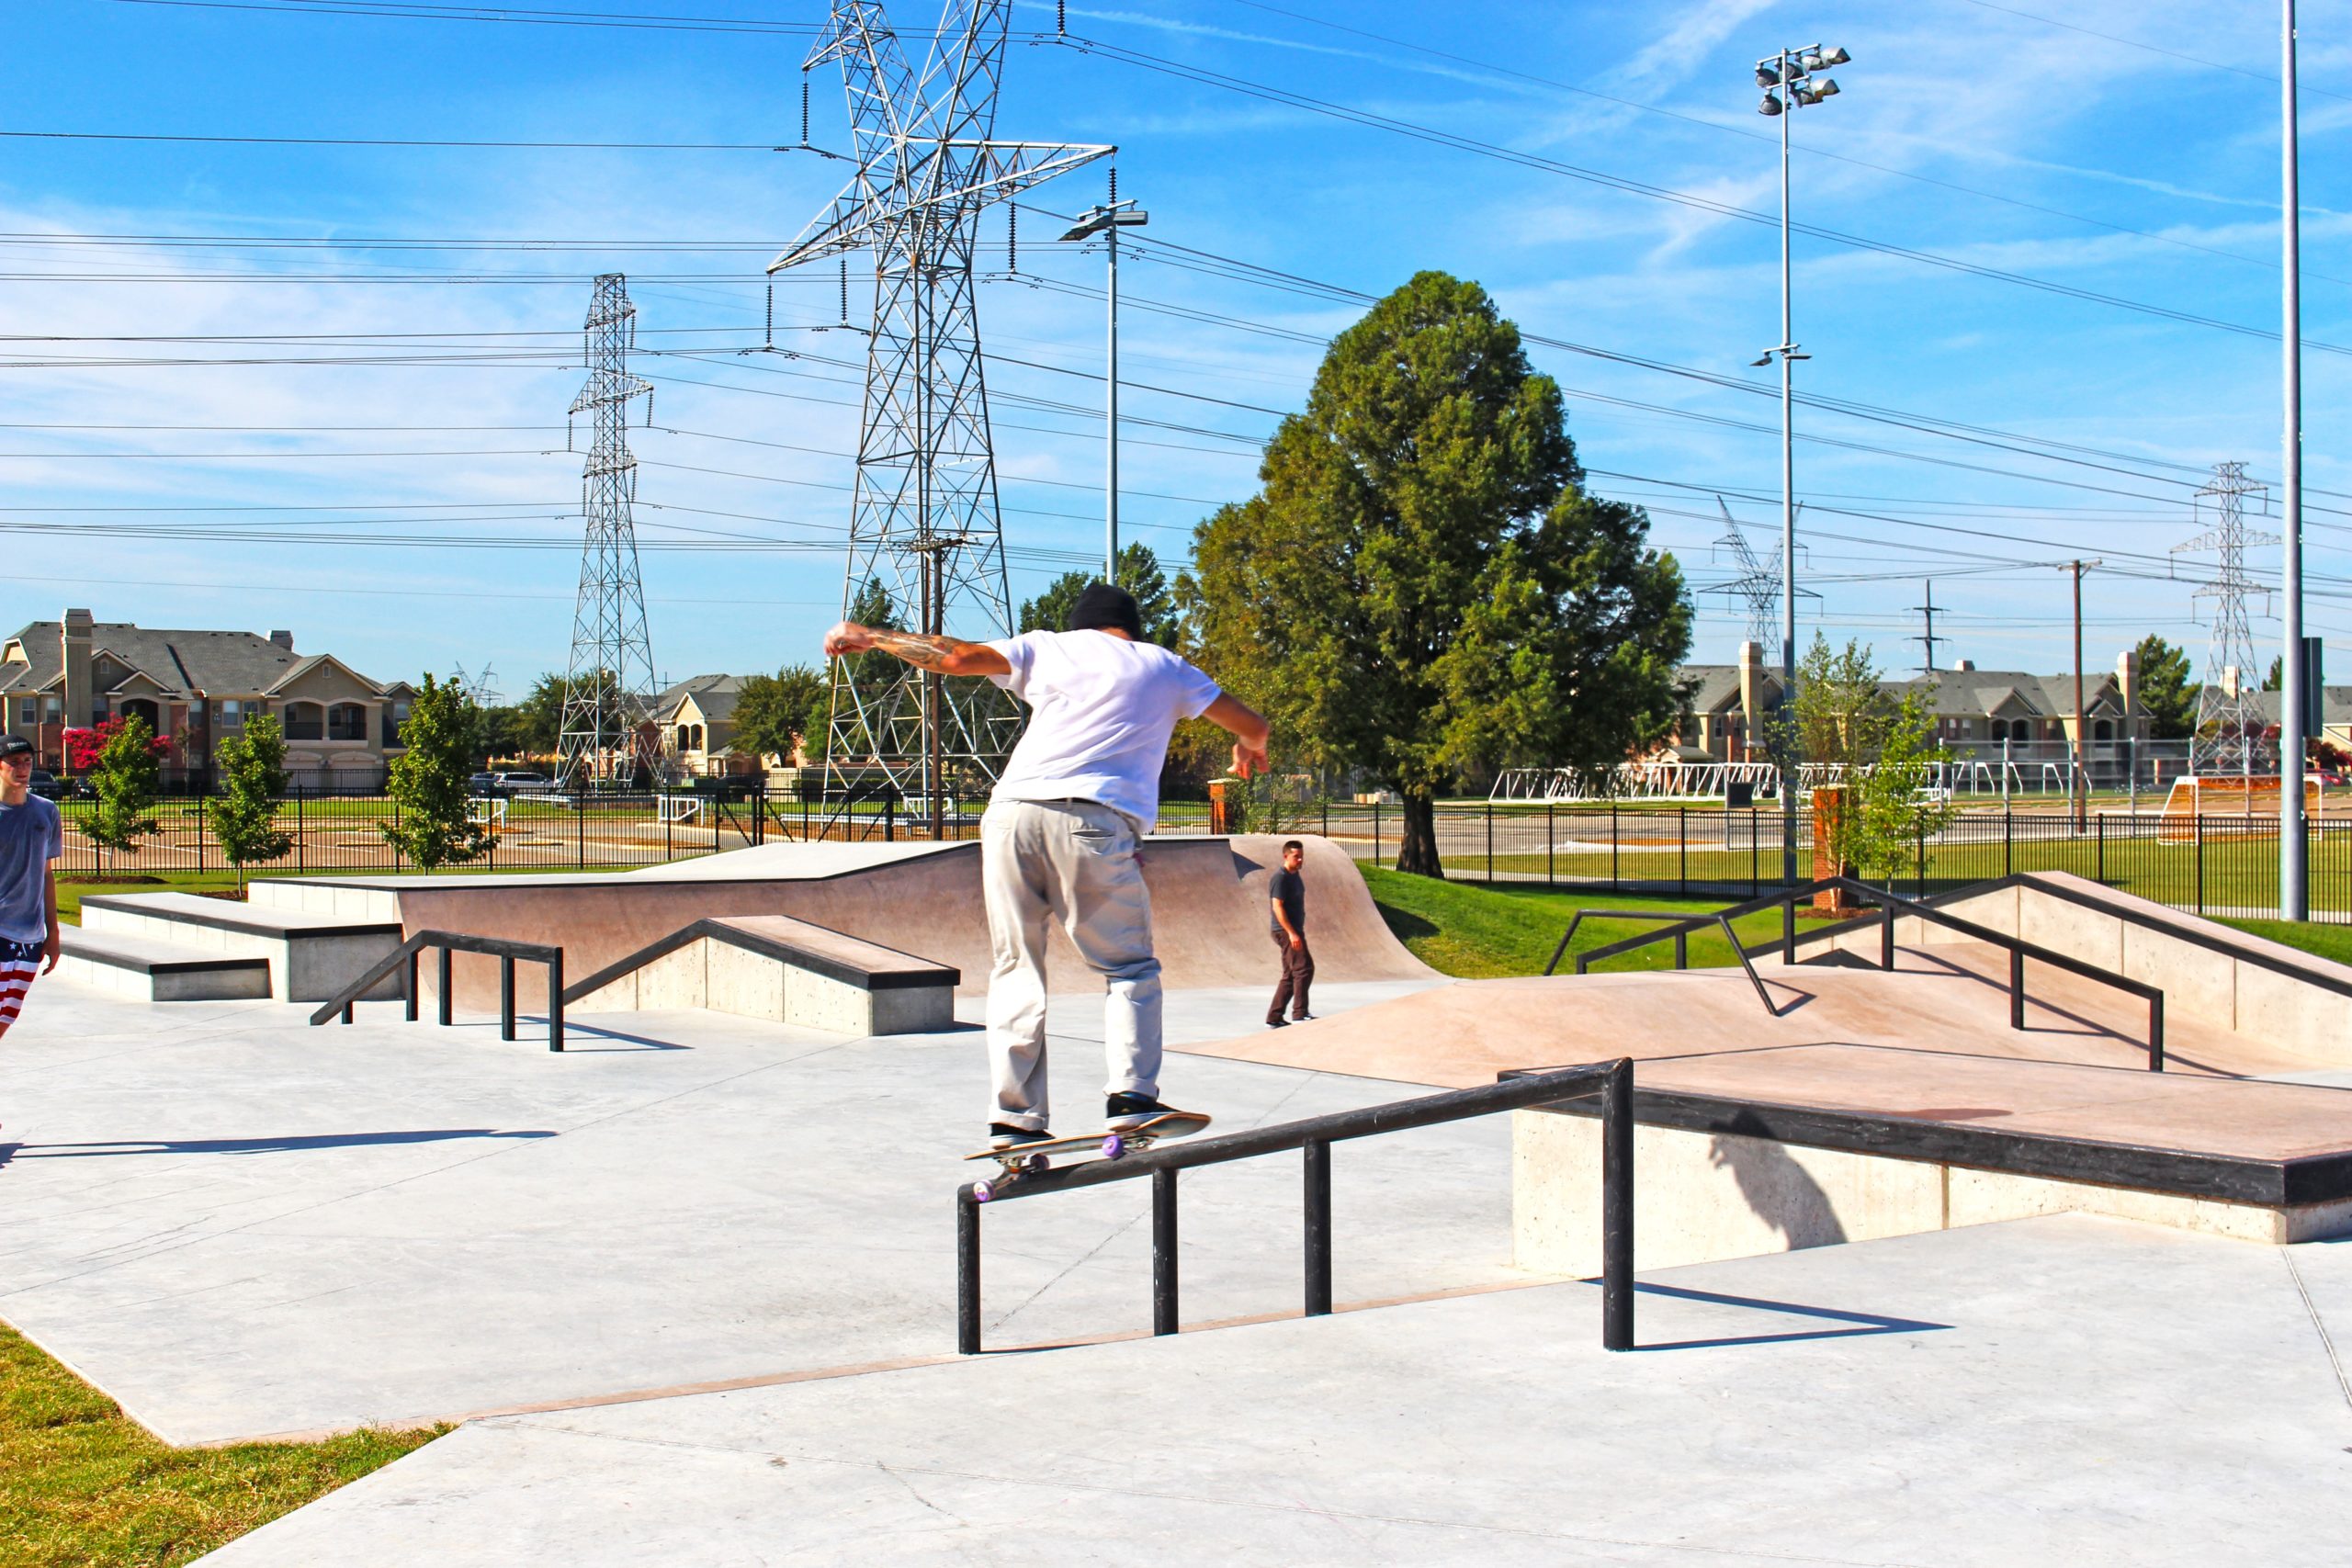 20 Top Things to Do in Plano - Carpenter Park Skate Park